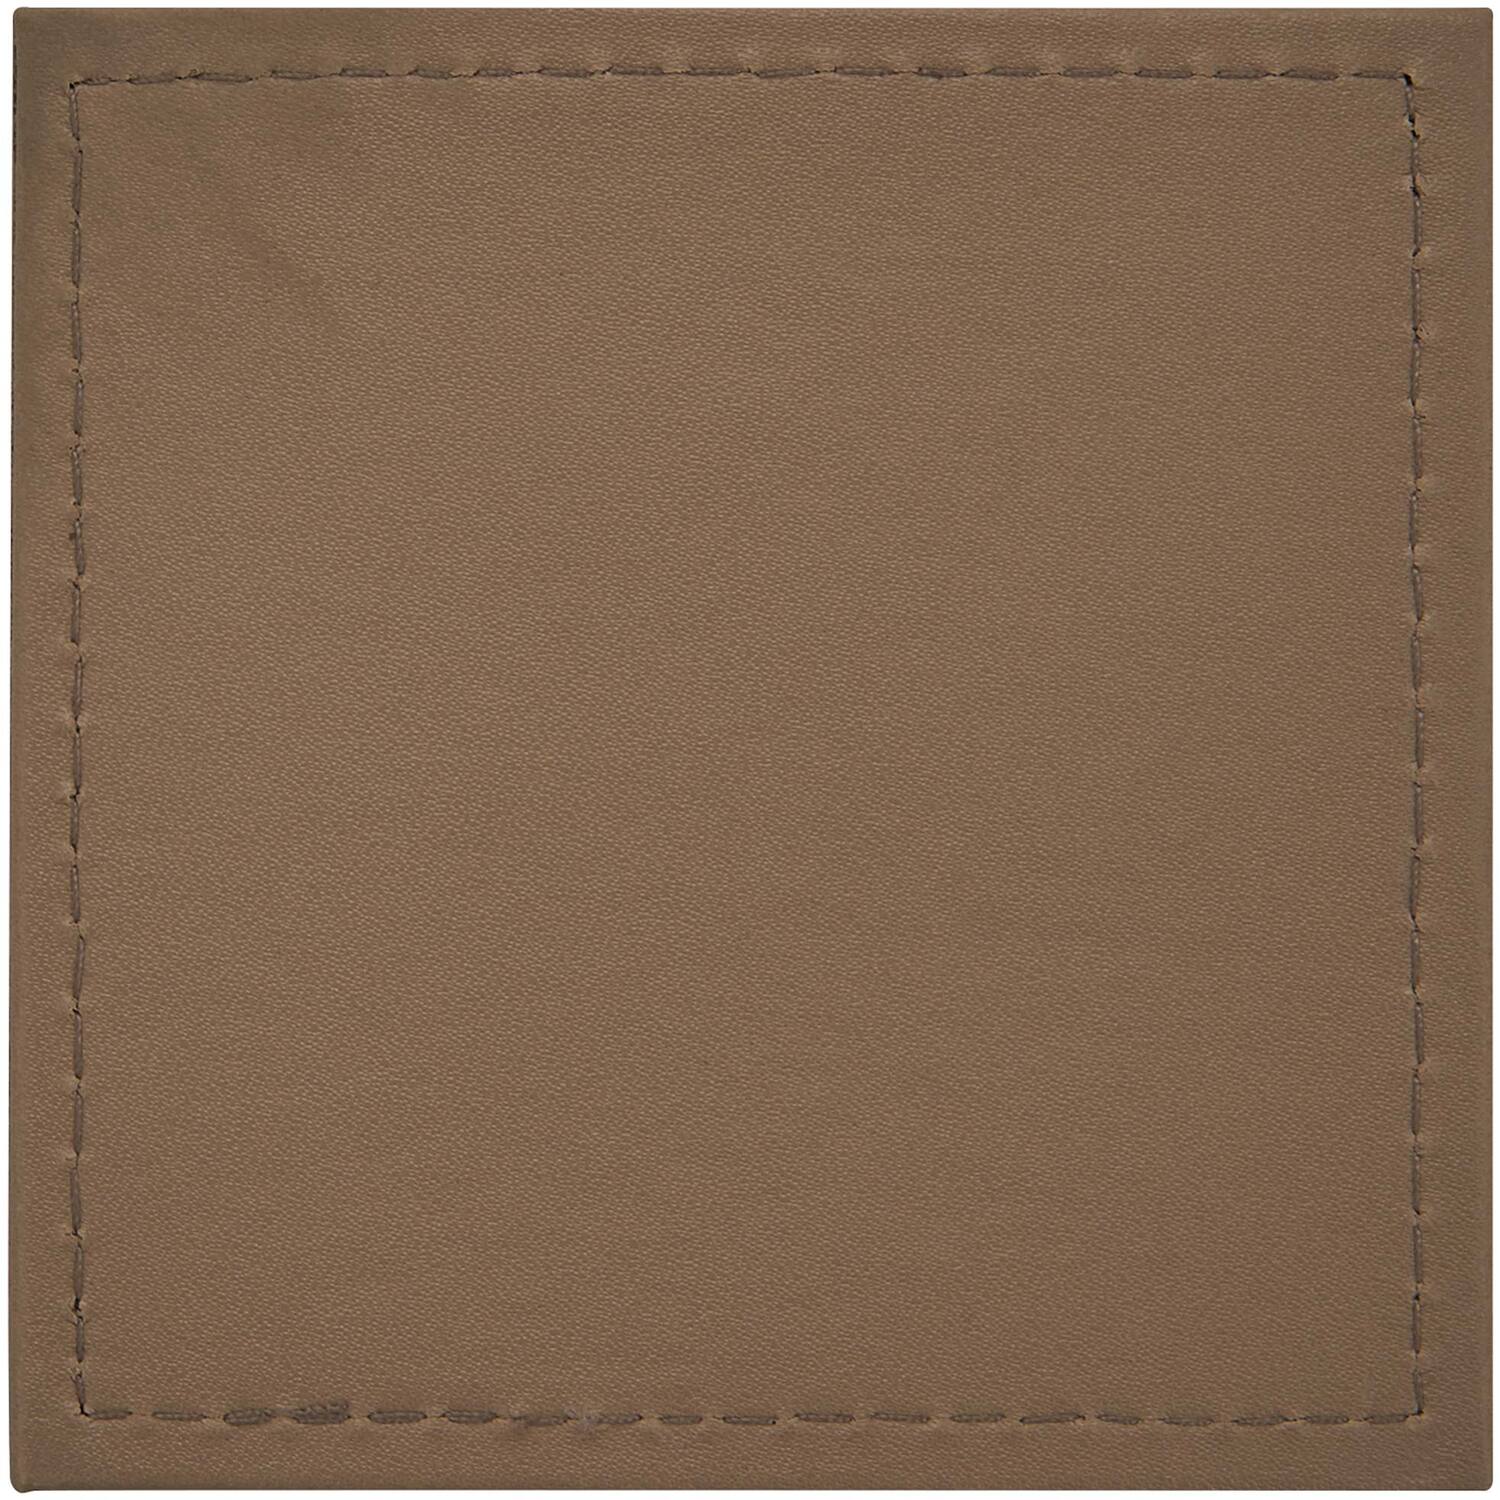 Set of 4 Faux Leather Coasters - Brown Image 4